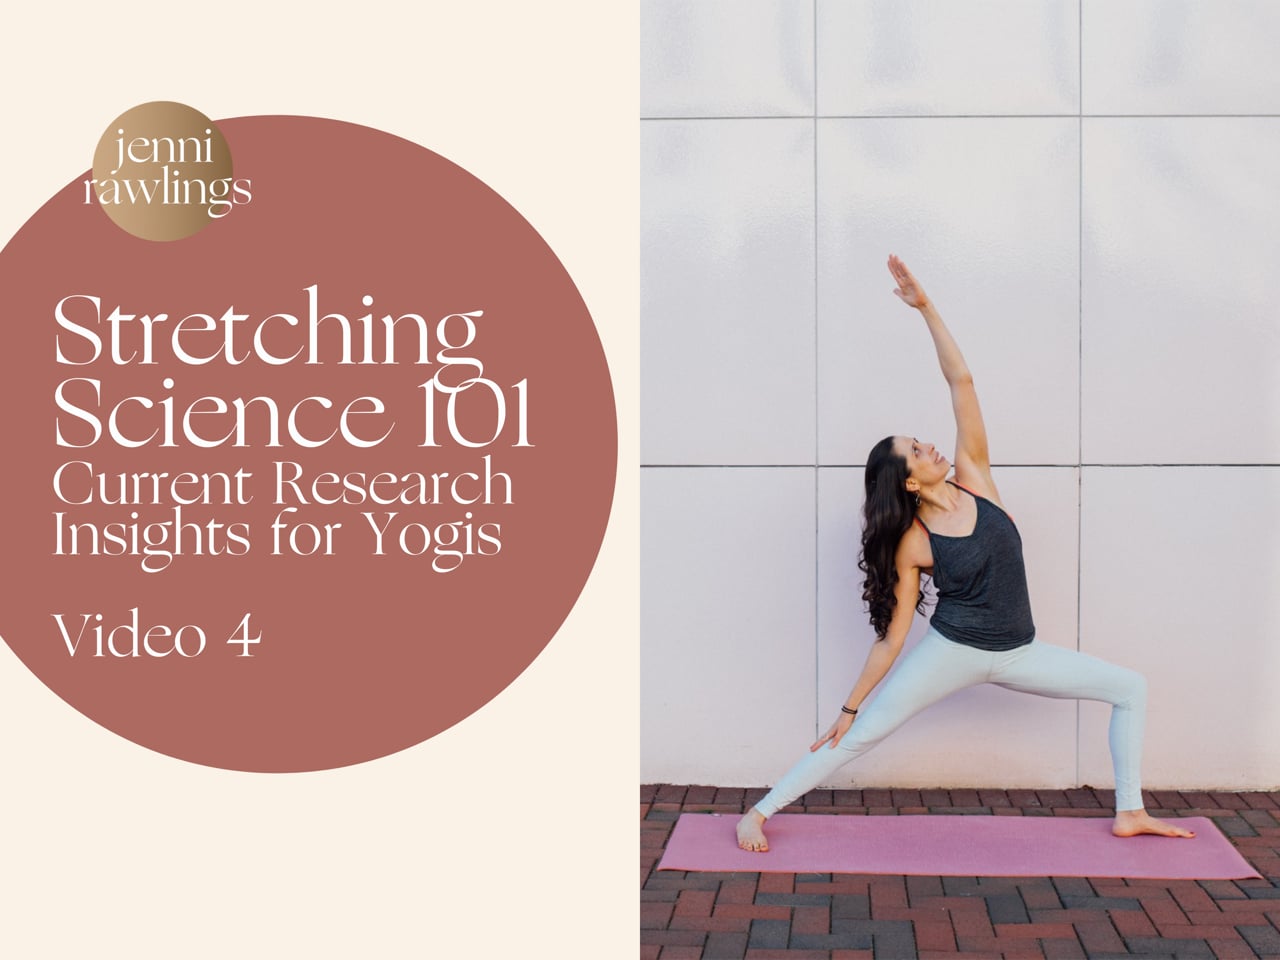 Video 4 – Stretching Science 101